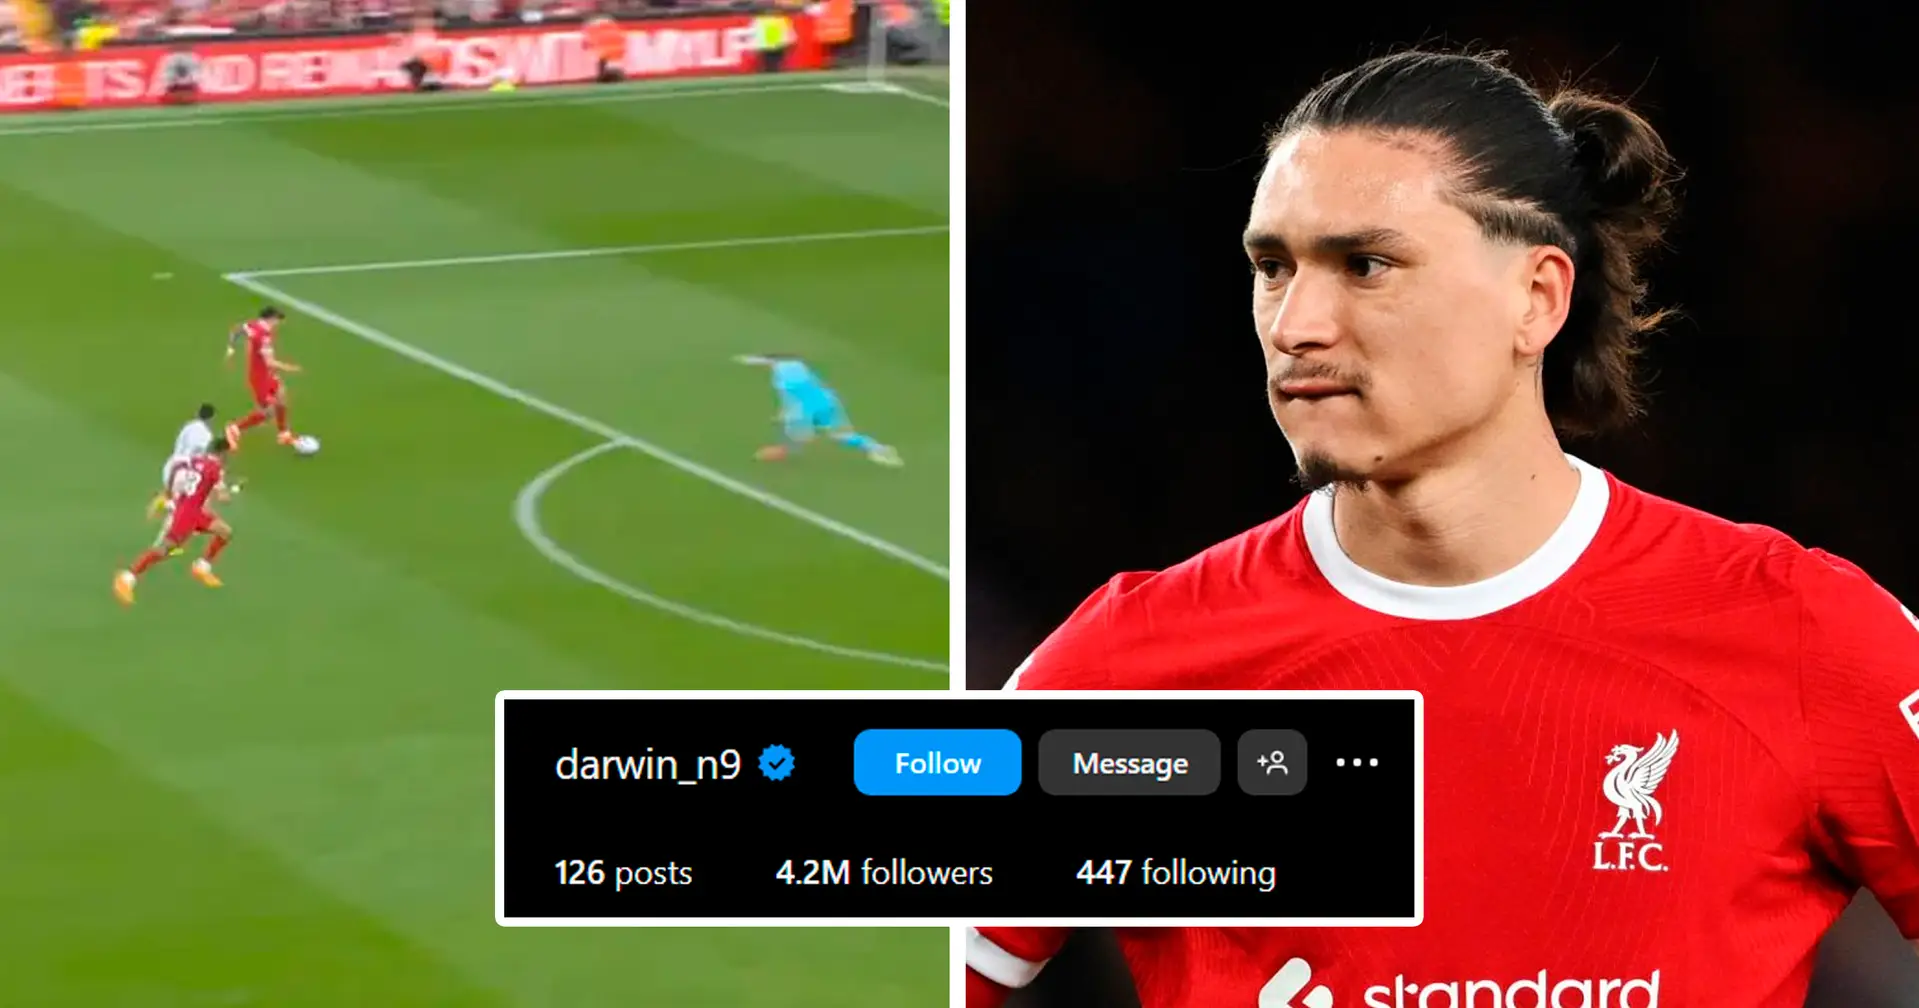 Why did Darwin Nunez delete all photos in Liverpool uniform - explained